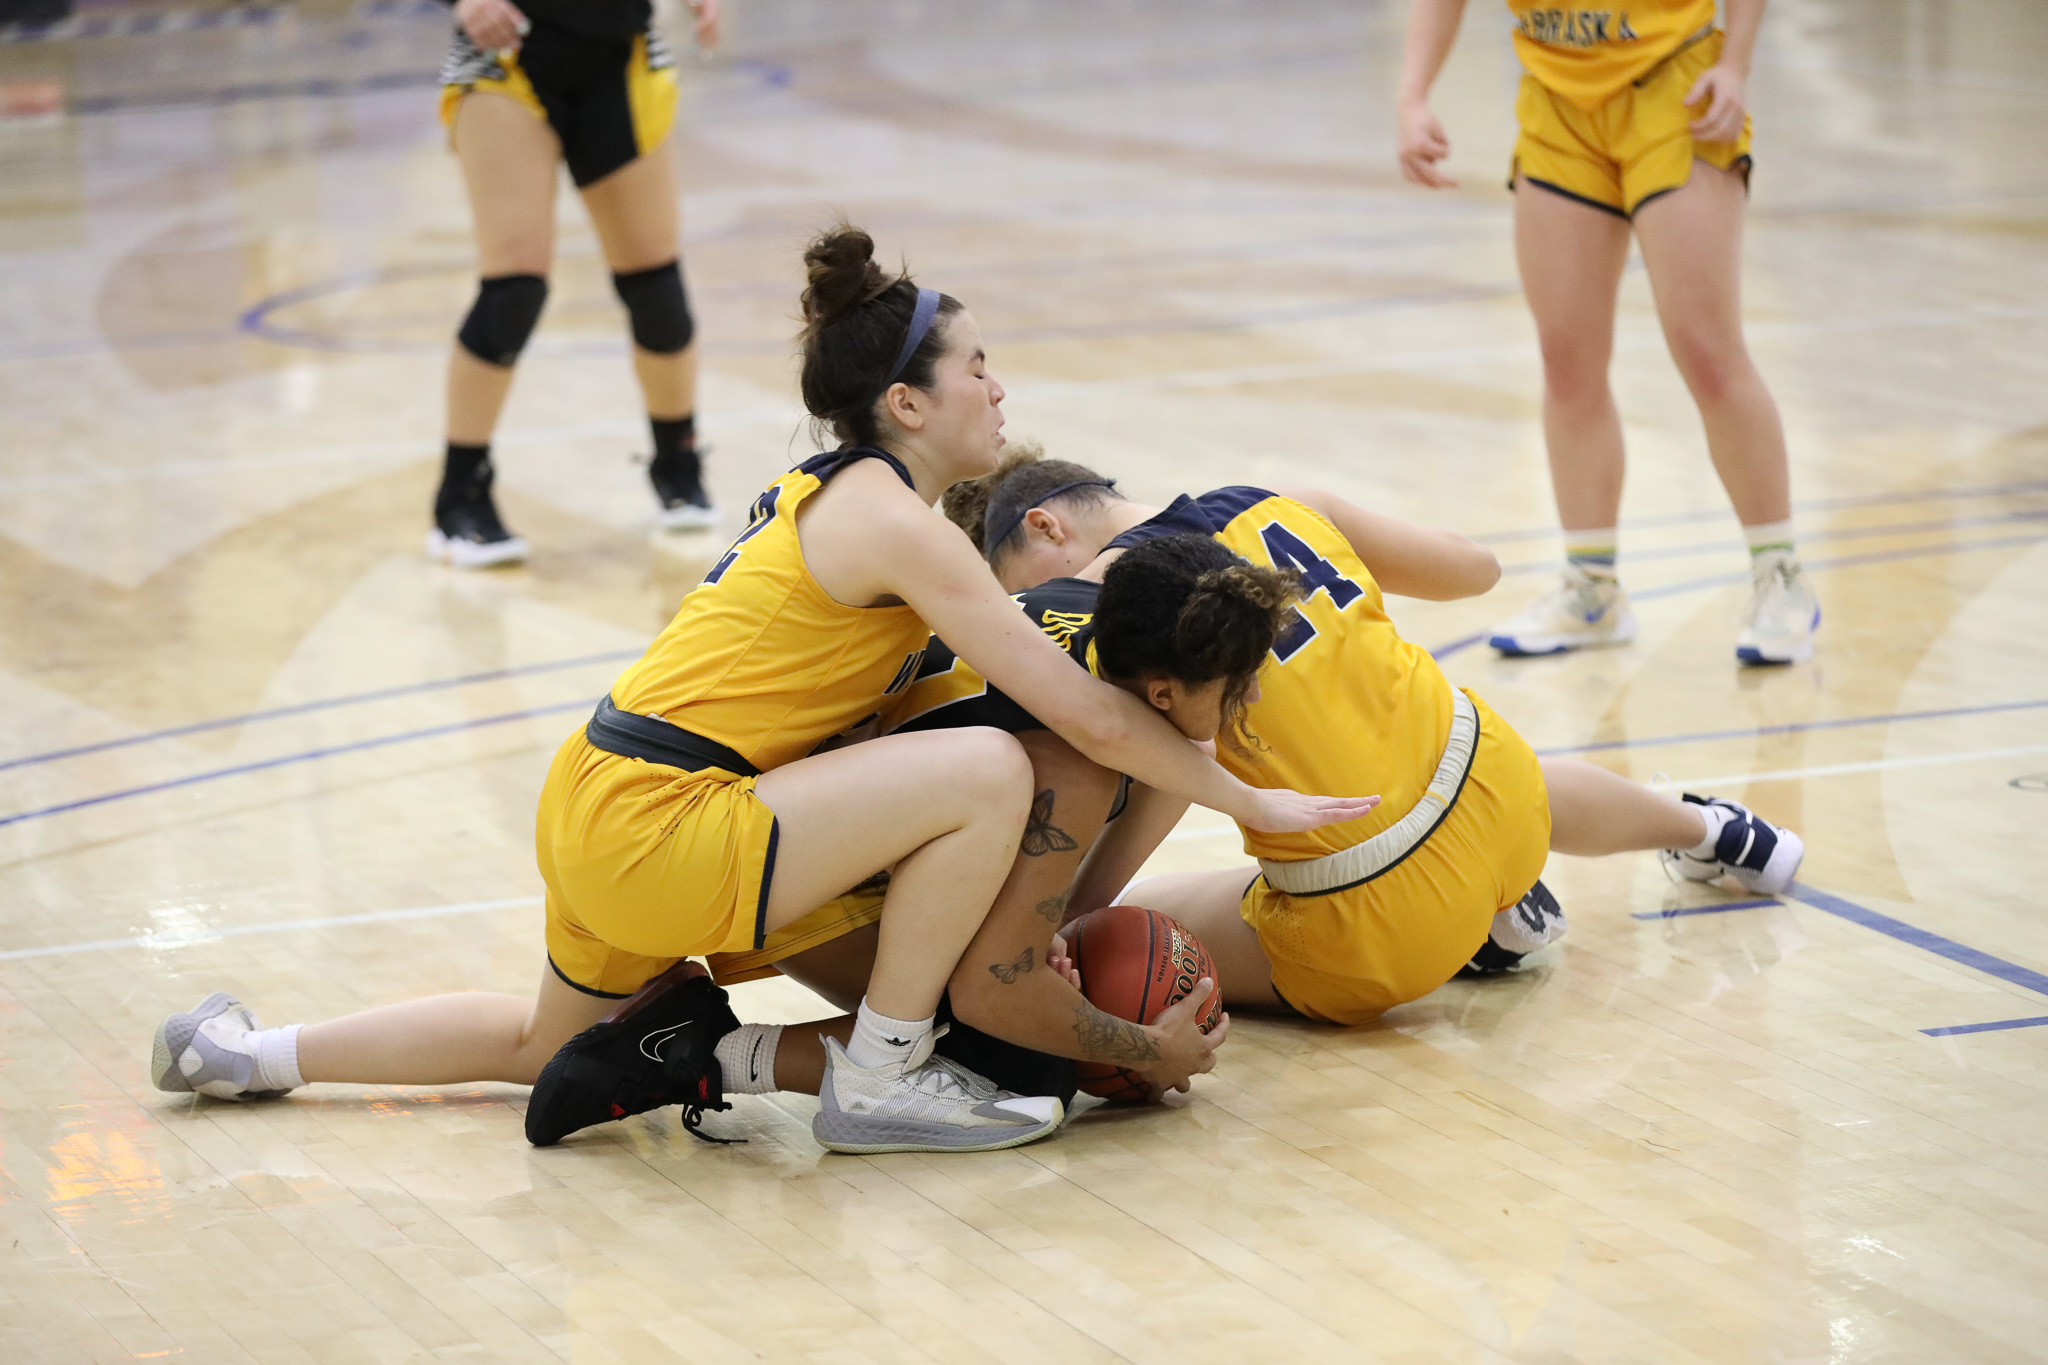 WNCC's basketball comes to an end with loss to Three Rivers, Cougars finish fifth at natinals